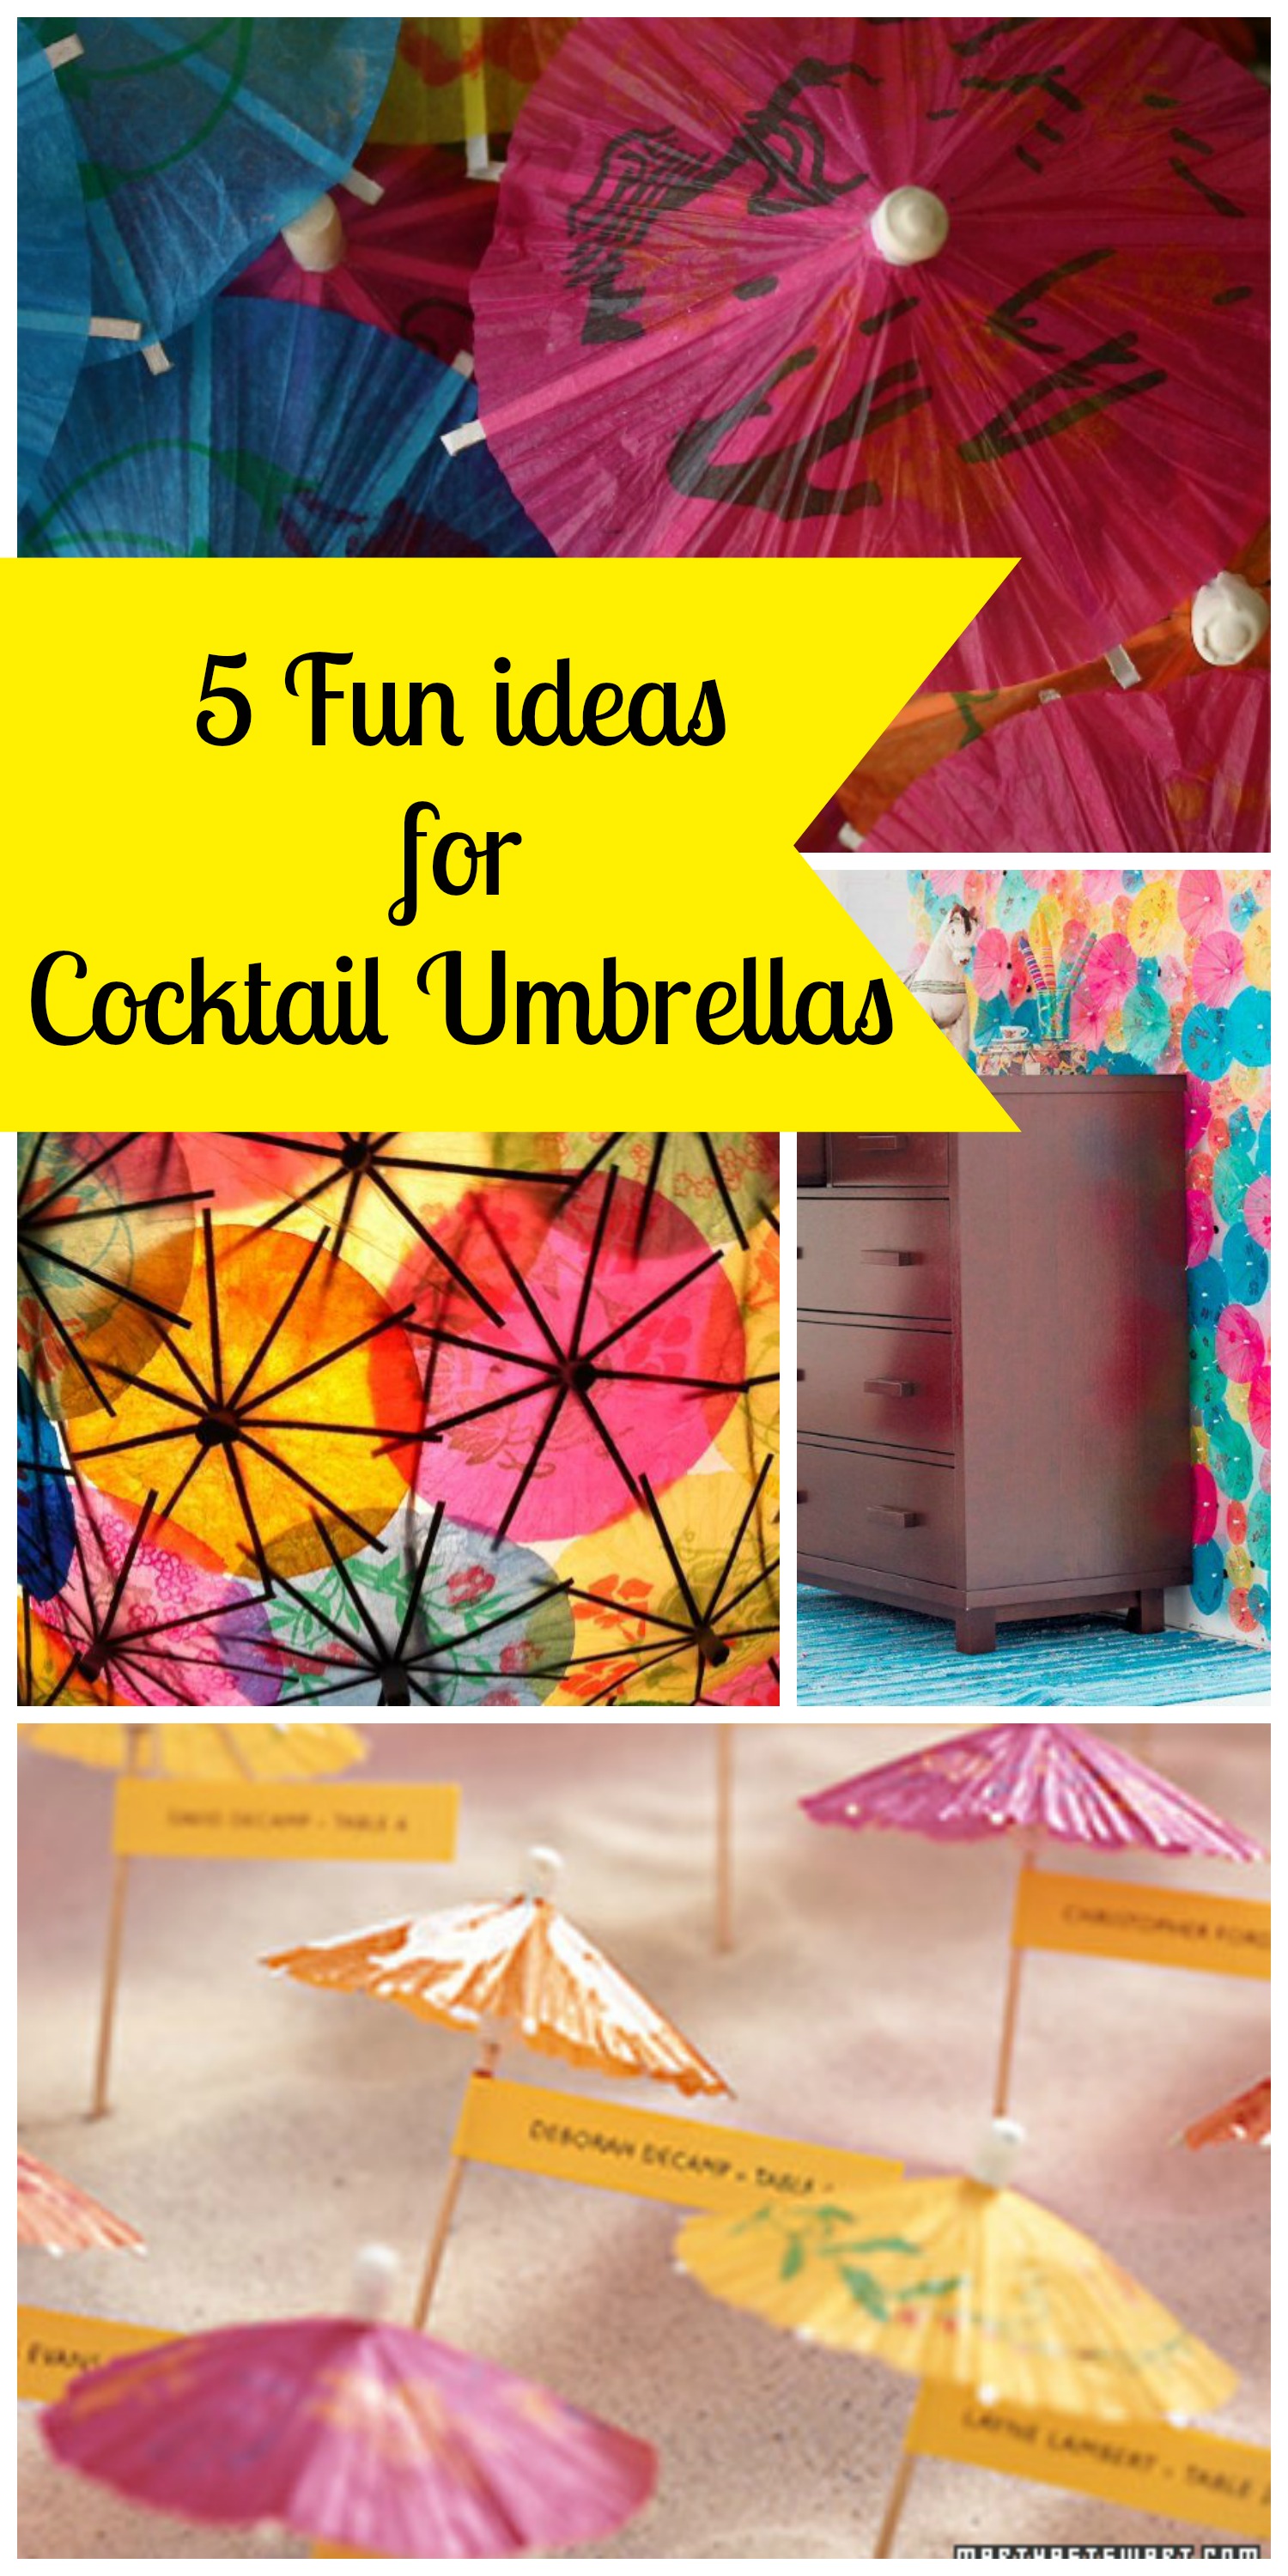 5 Uses for Cocktail Umbrellas - Everyday Party Magazine